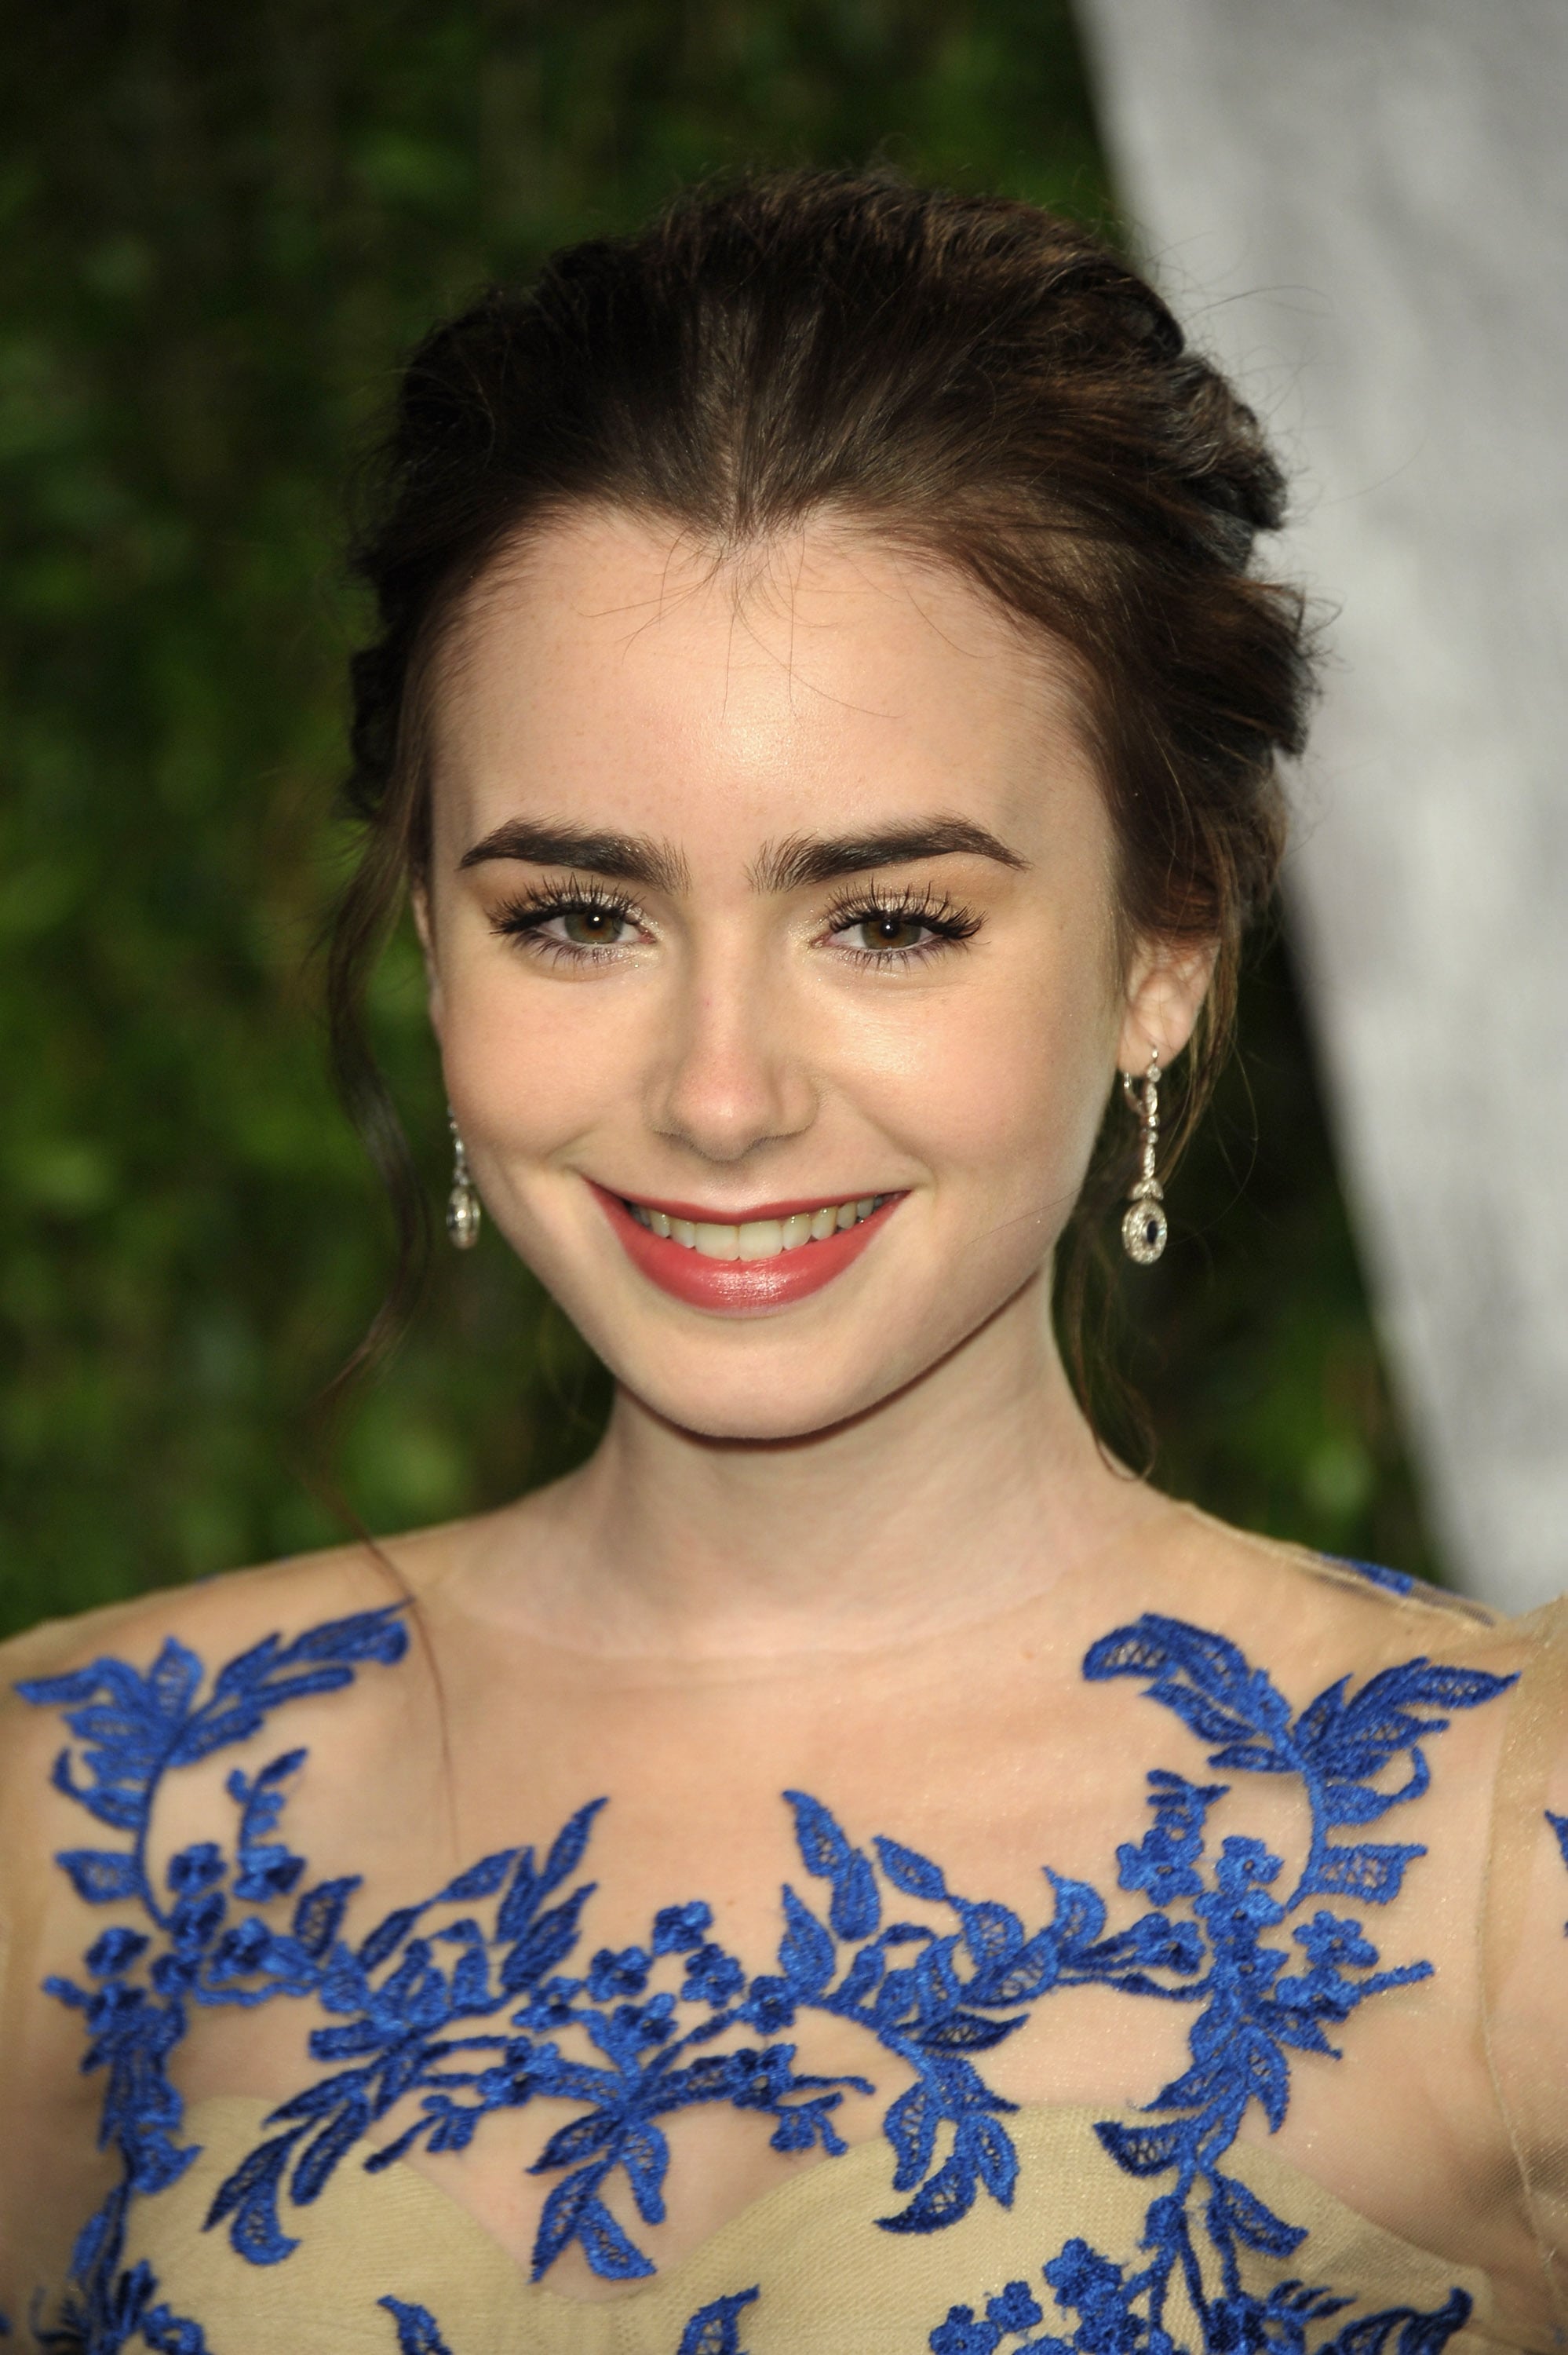 Lily Collins at the Vanity Fair Oscar party.